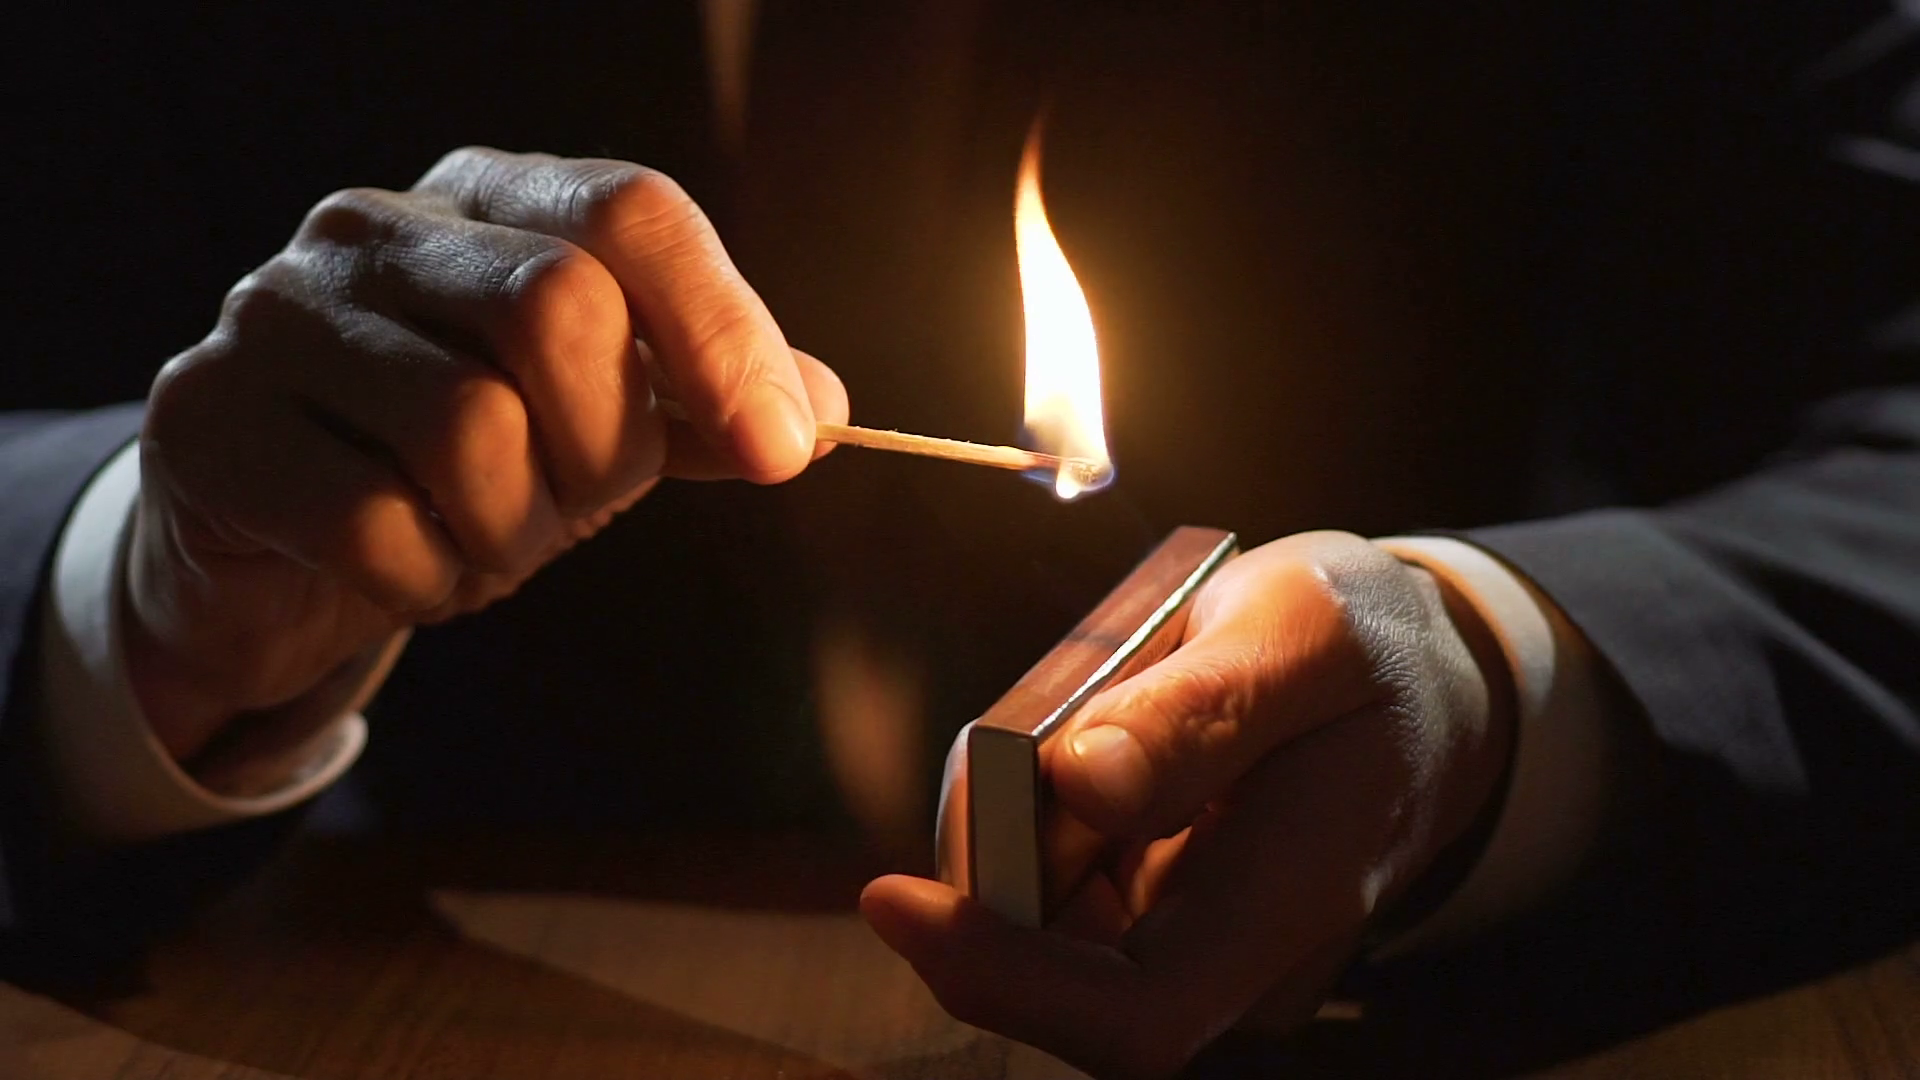 Male hands holding matchbox and burning match, life passes by fast ...